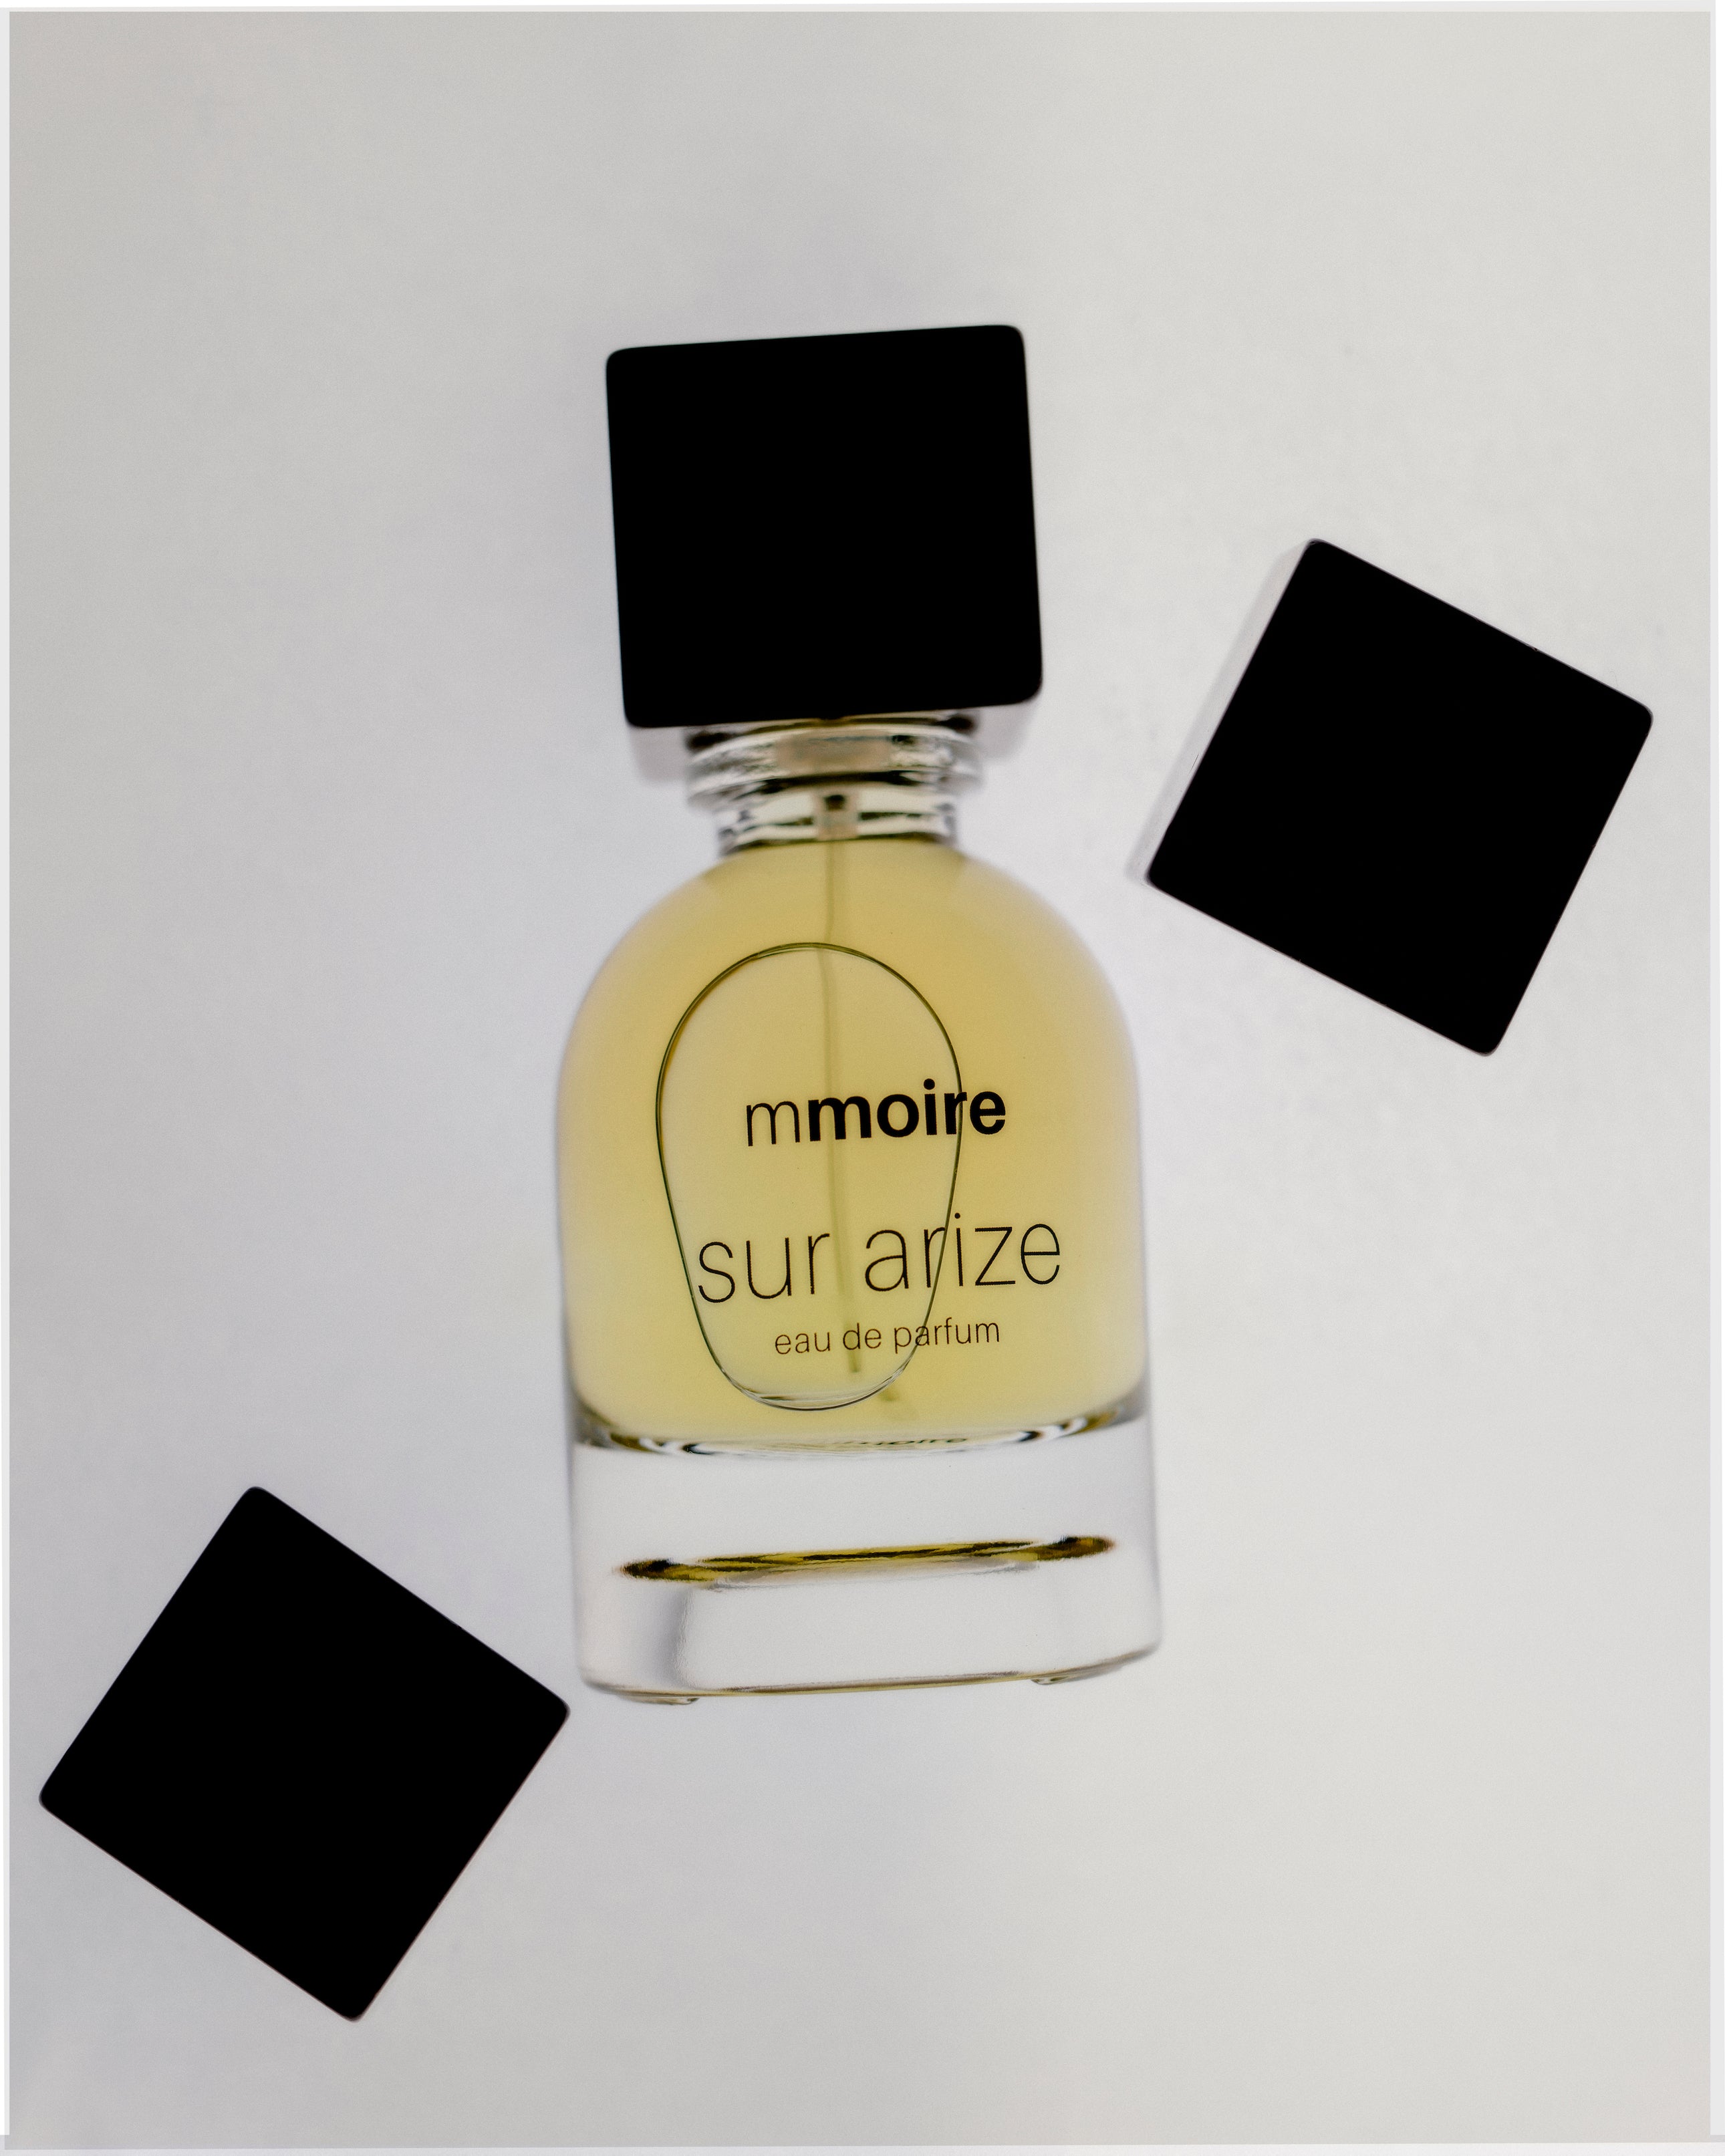 Mmoire - sur arize fragrance. Niche and Unisex fragrance enhanced by a molecular and woody scent.